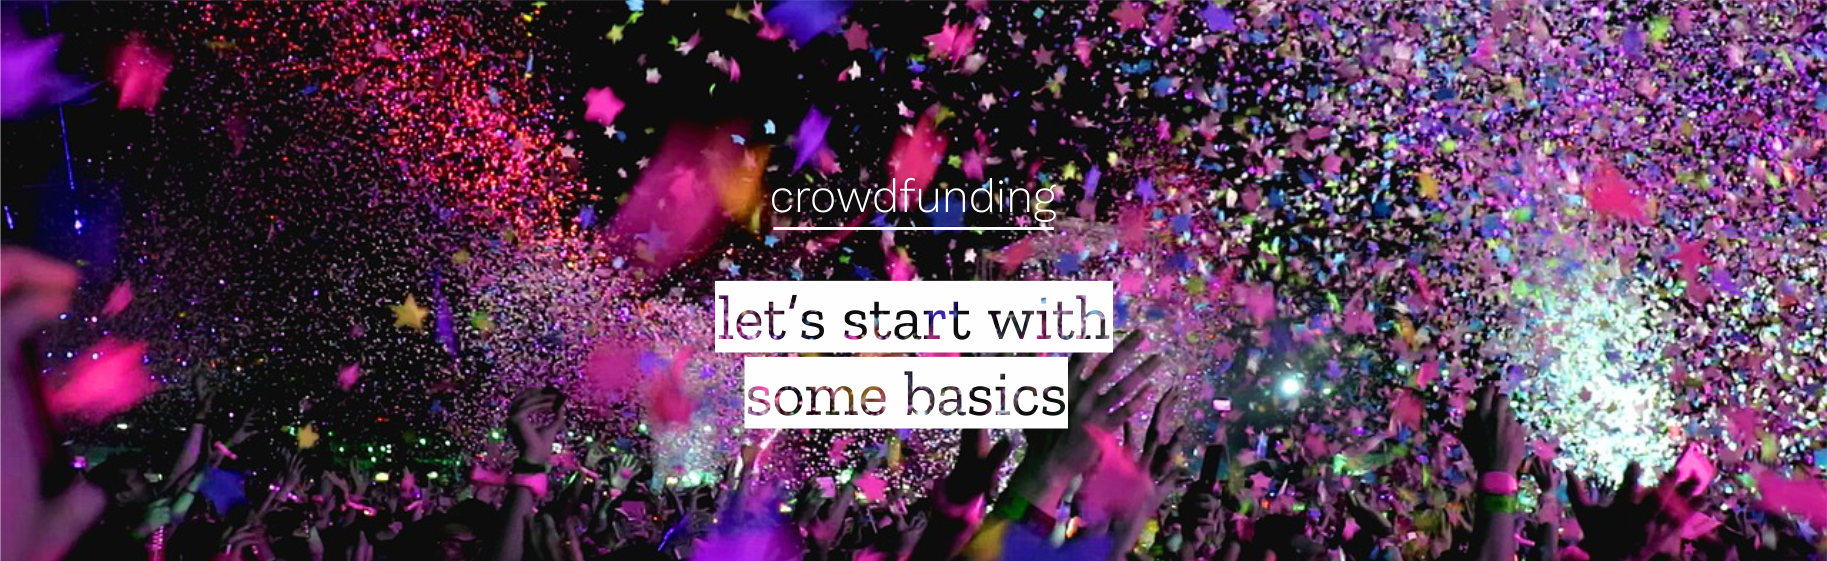 Crowdfunding – let’s start with some basics